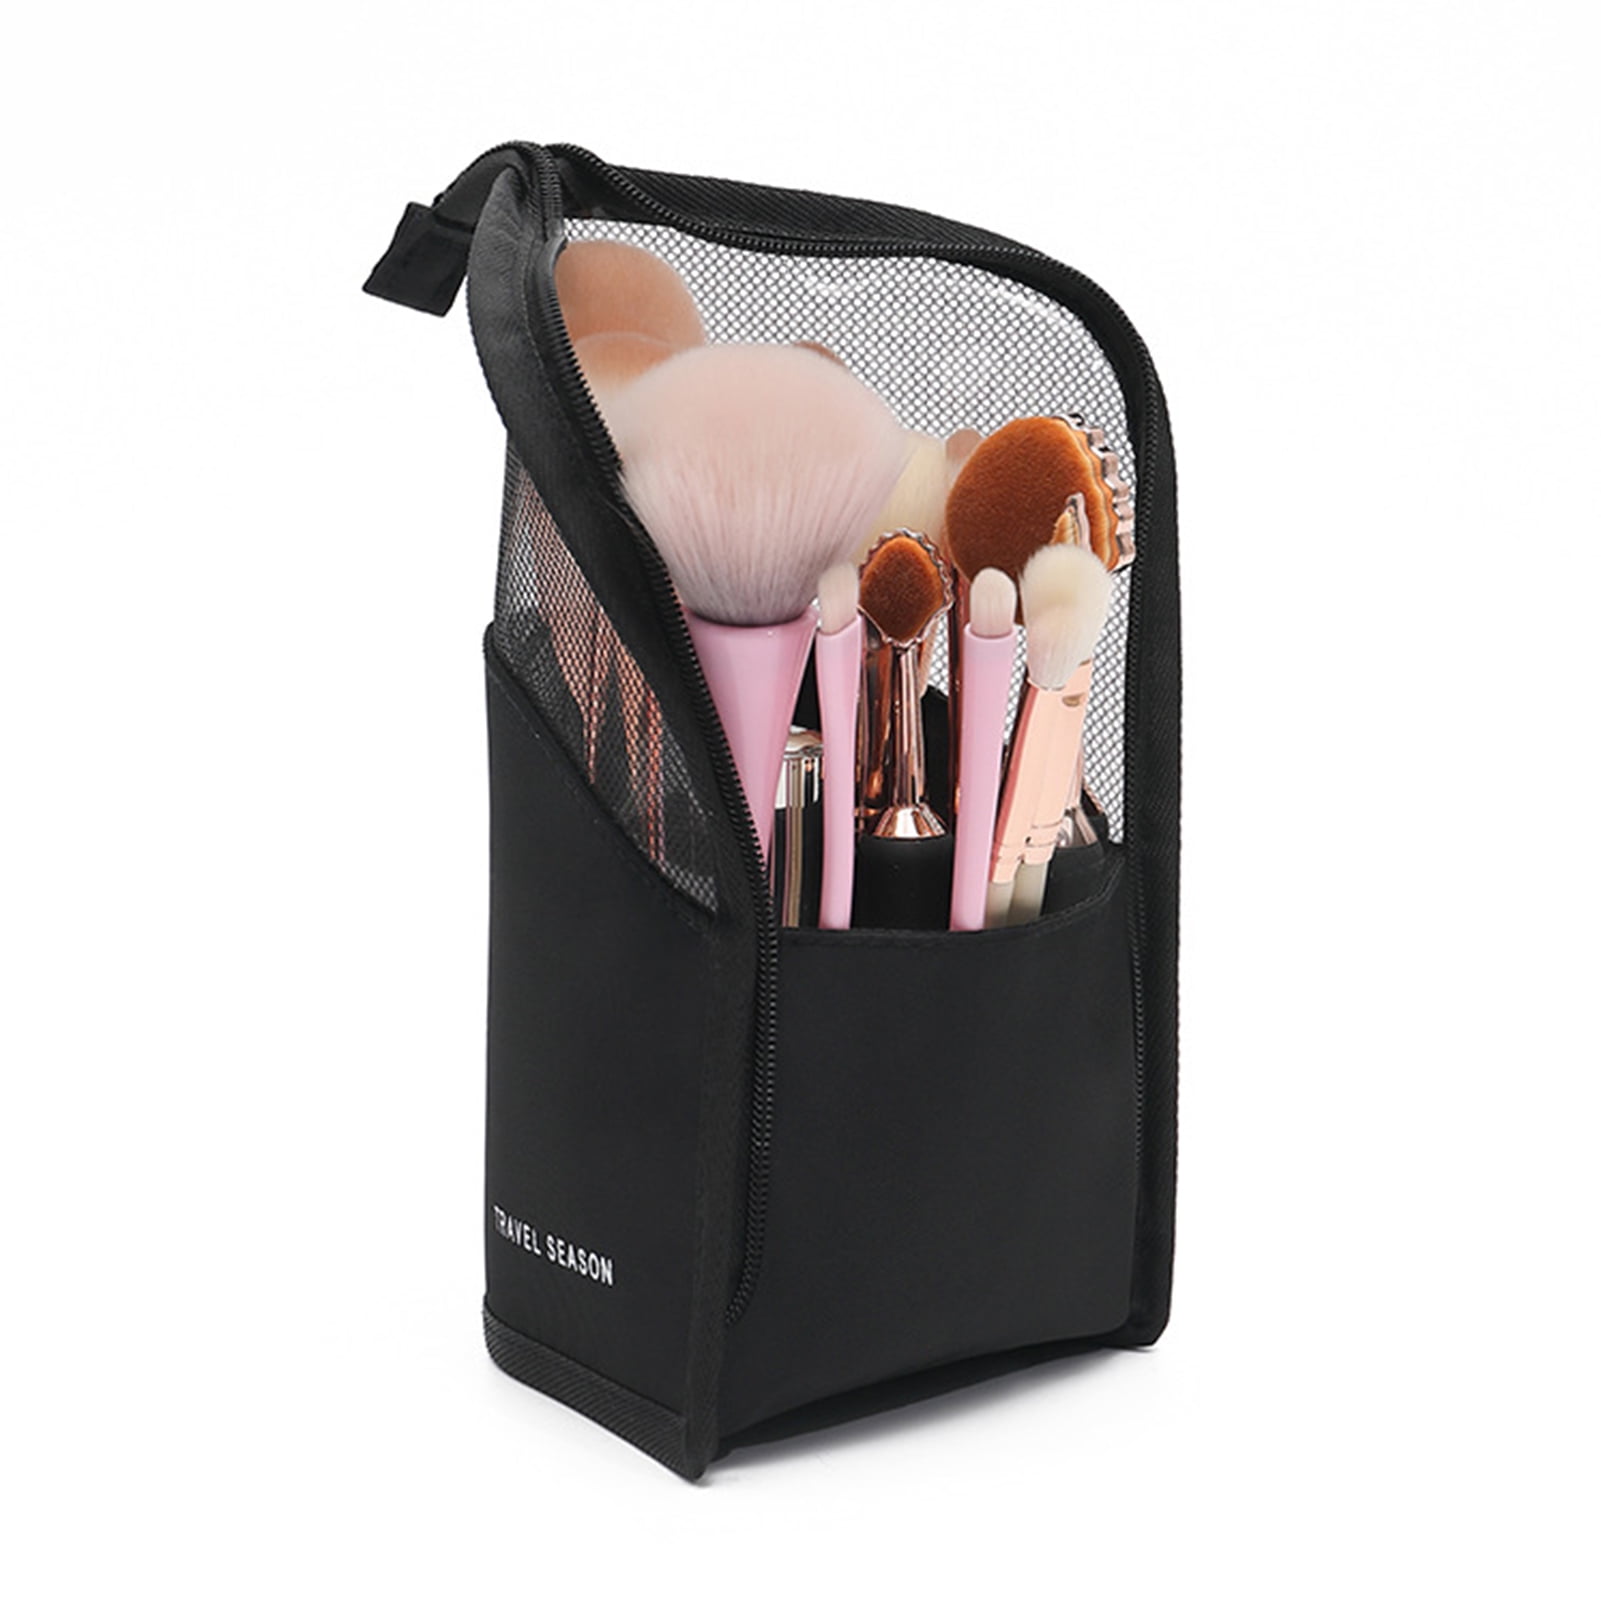  LEEFONE Makeup Brush Organizer Bag, Pink Travel Makeup Brush  Holder, High Capacity Portable Waterproof Dust-Free Stand-Up Makeup Brush  Holder with Divider for Women Girls : Beauty & Personal Care